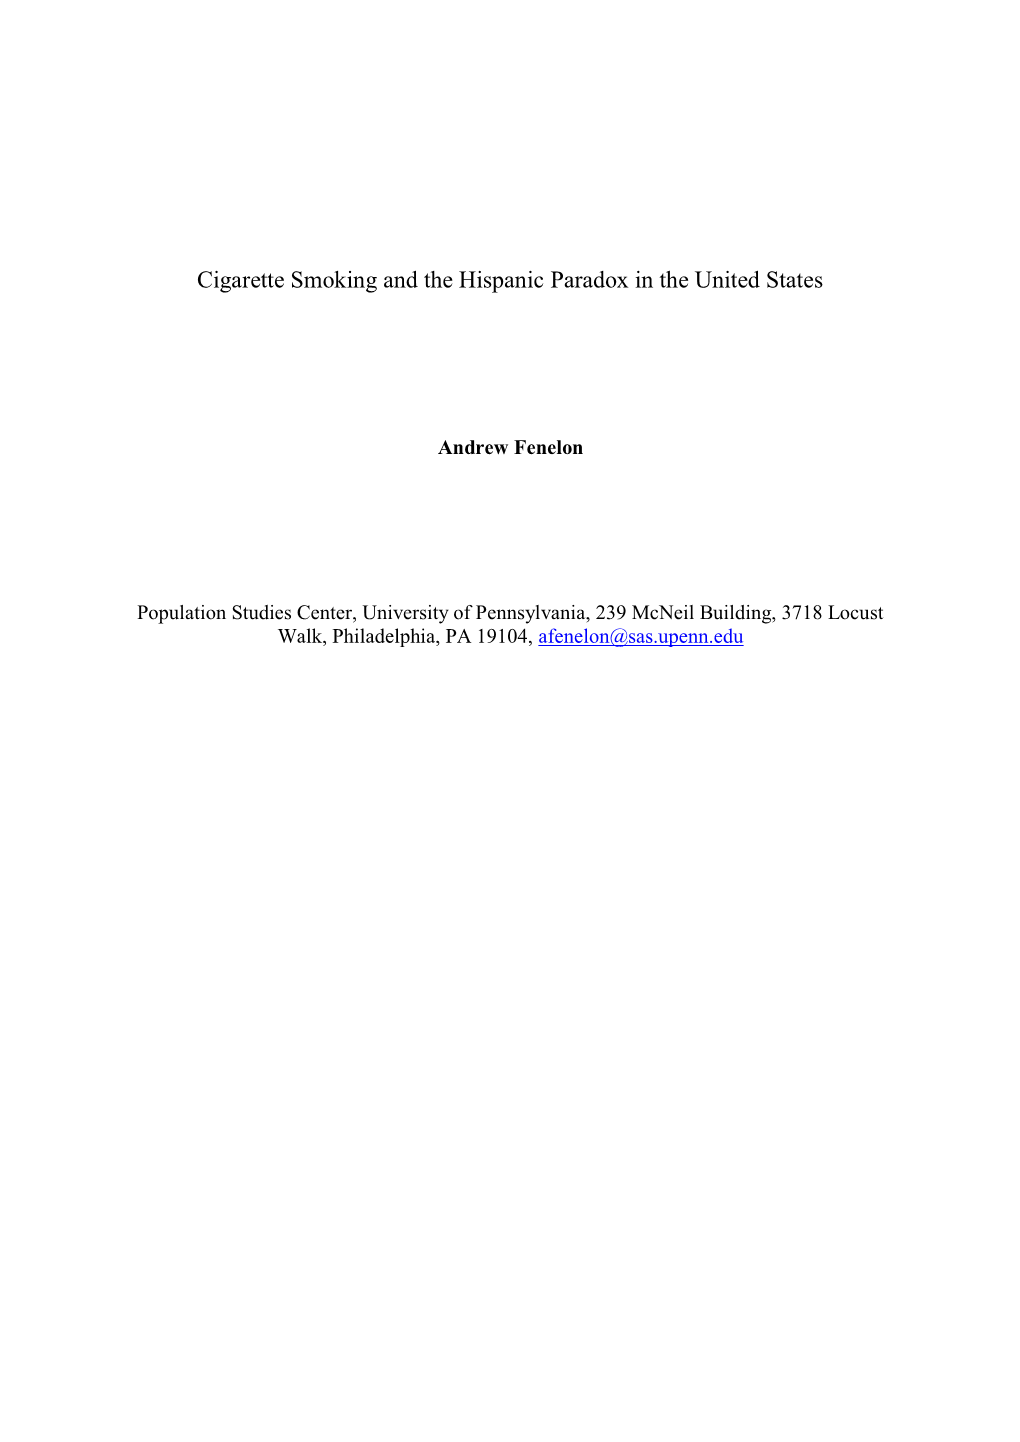 Cigarette Smoking and the Hispanic Paradox in the United States